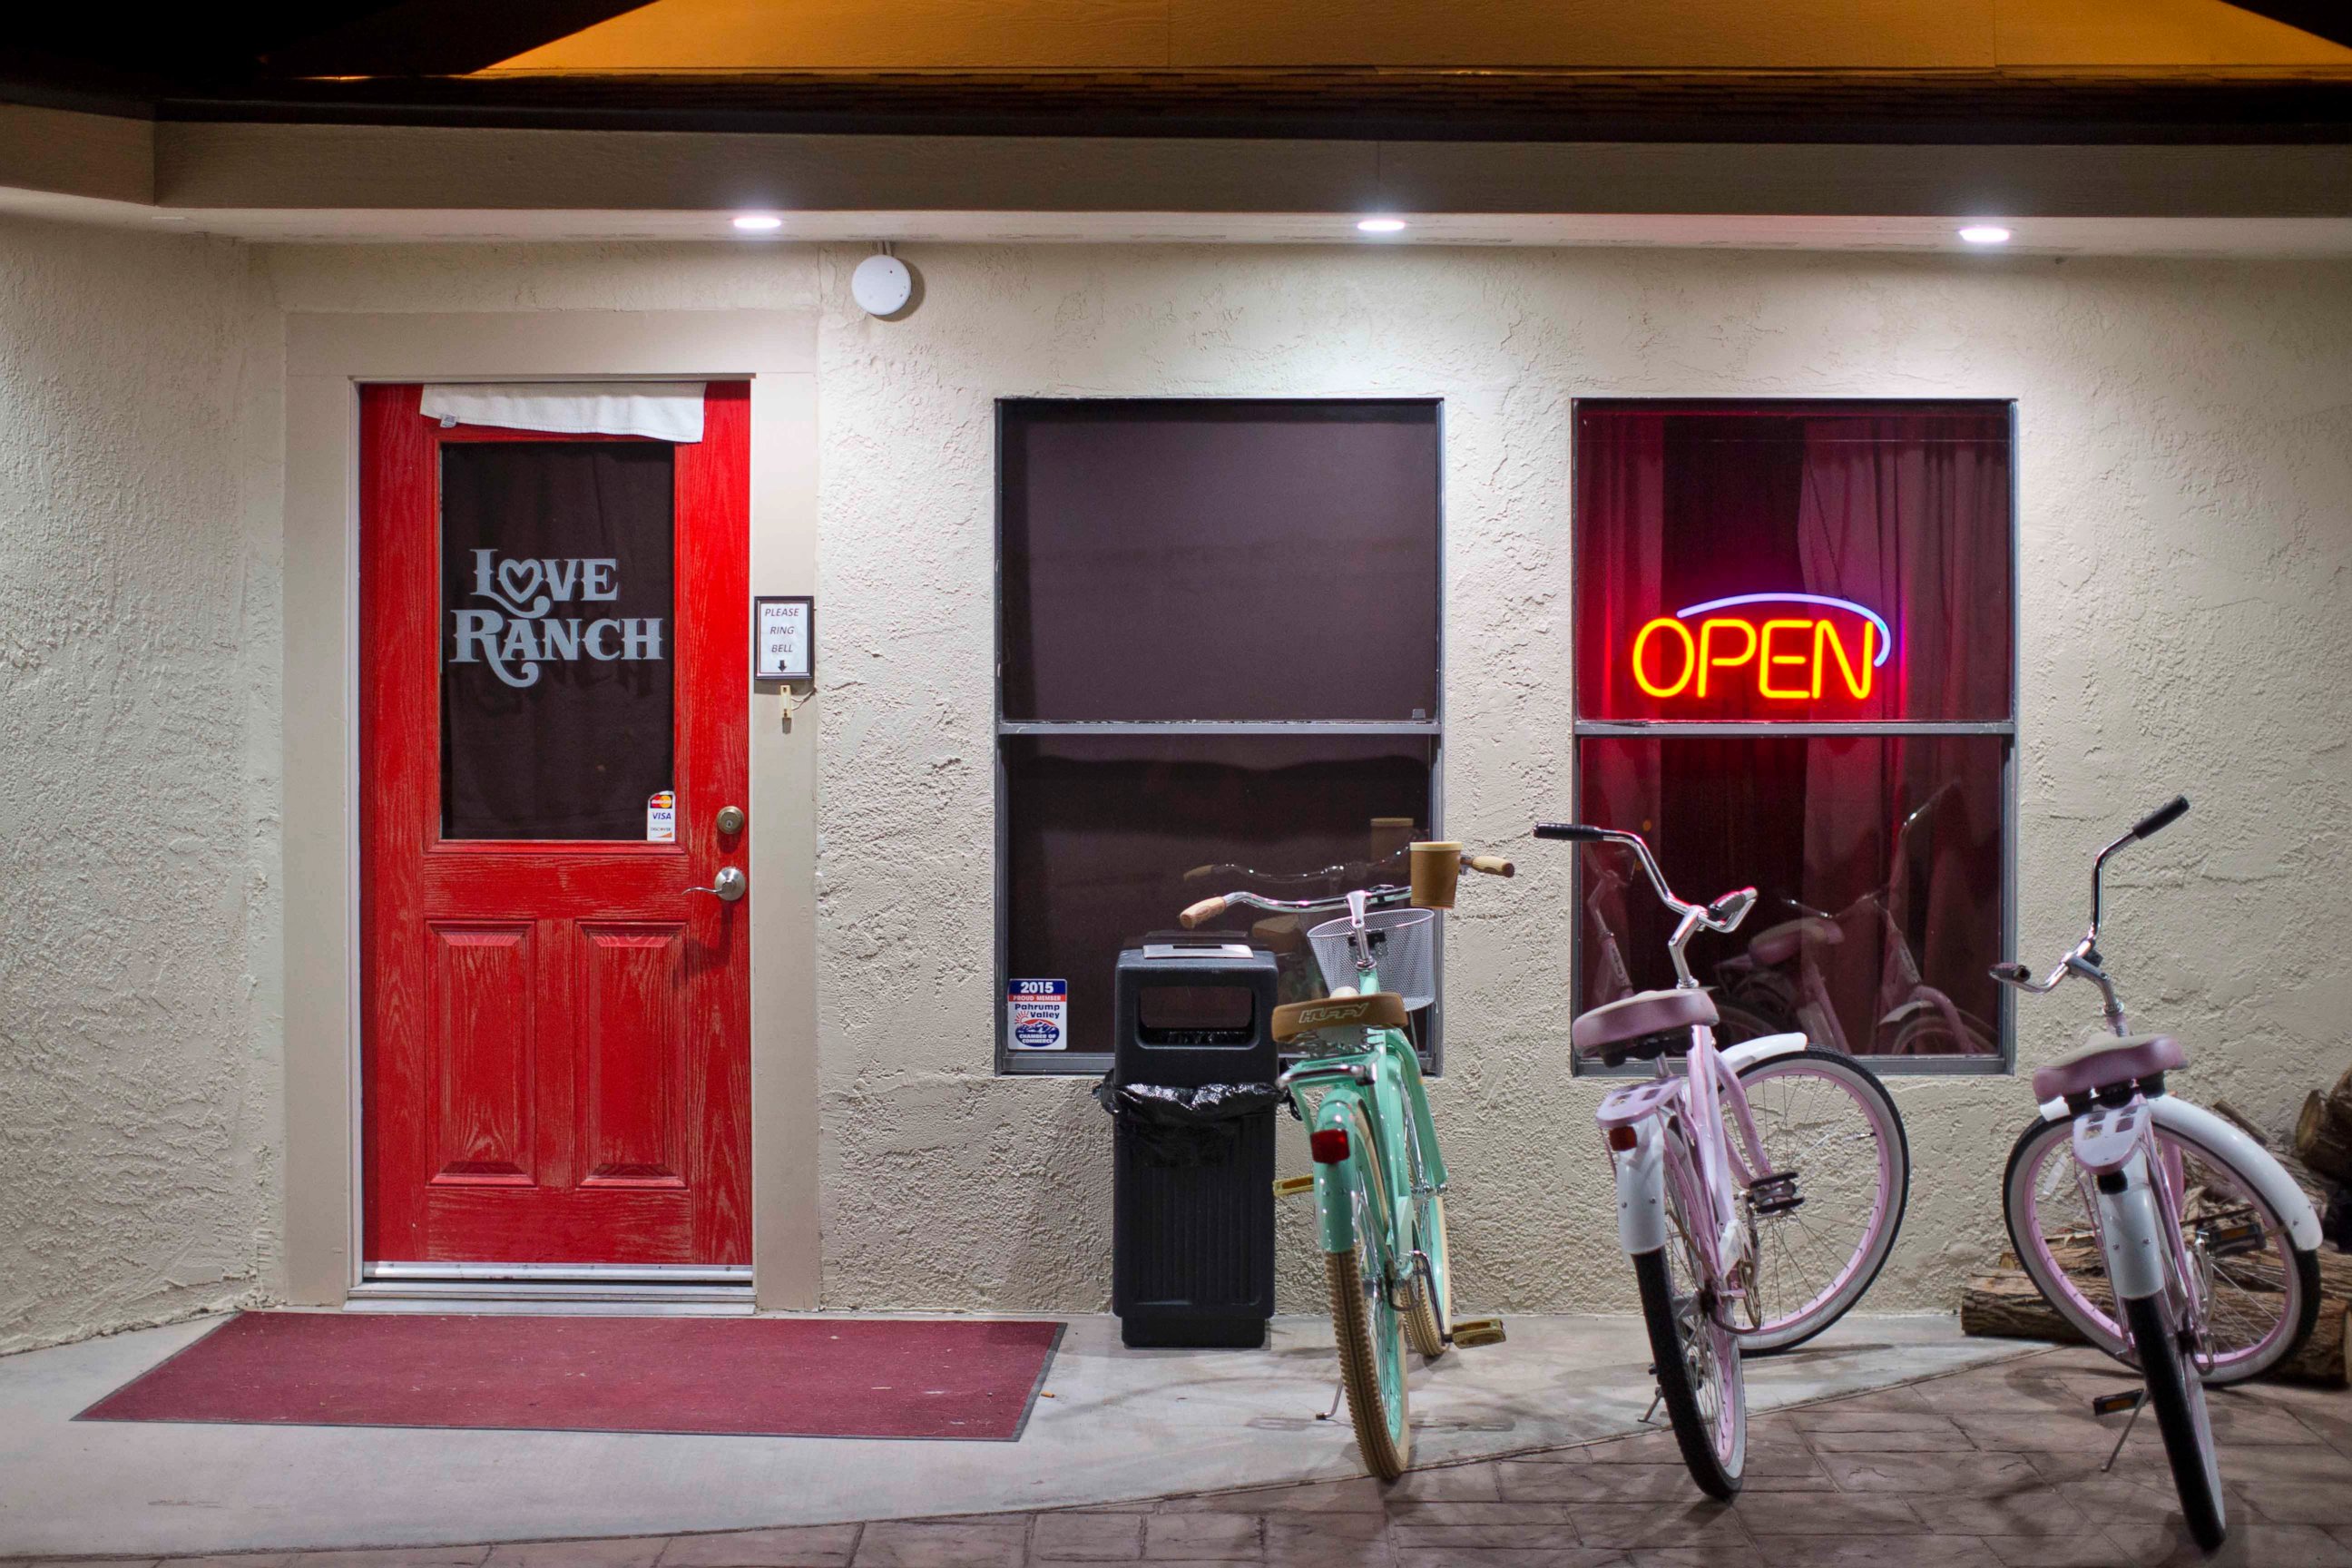 PHOTO: Bicycles sit outside the Nevada brothel where Lamar Odom was found unconscious, Dennis Hof's Love Ranch, in Crystal, Nev., just outside Pahrump, Oct. 10, 2015.